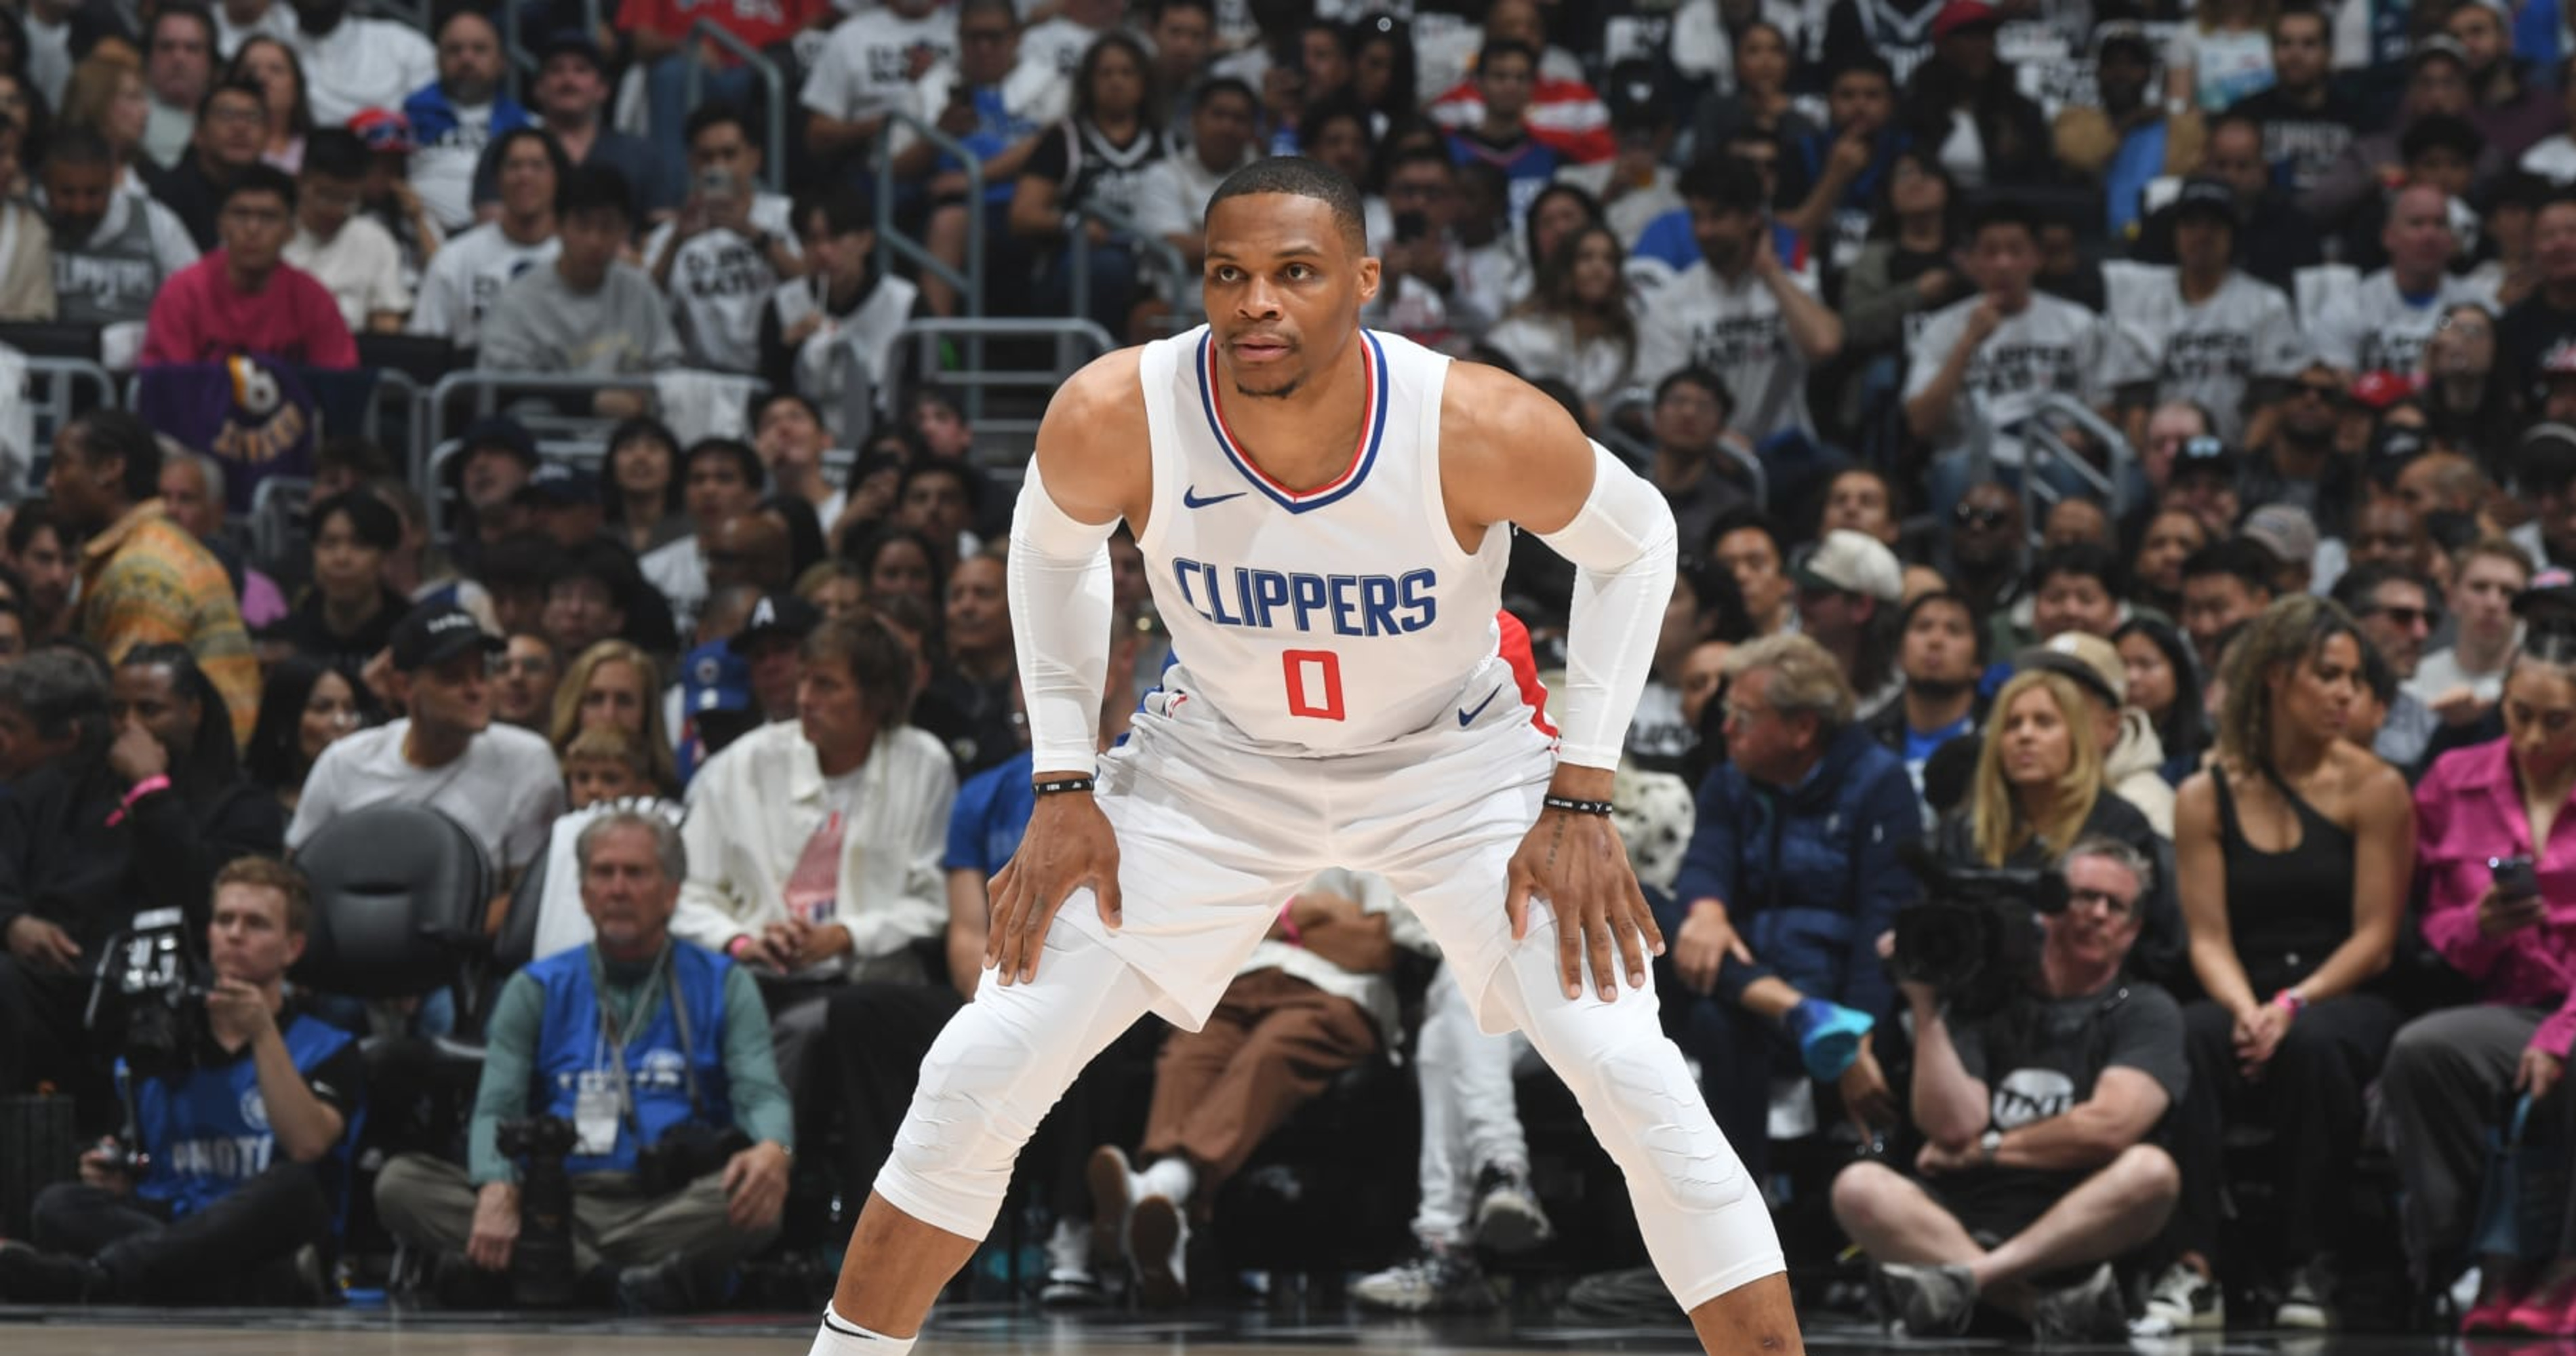 Russell Westbrook Thanks Clippers After Trade; PG Says Fans 'Keep Me Motivated'